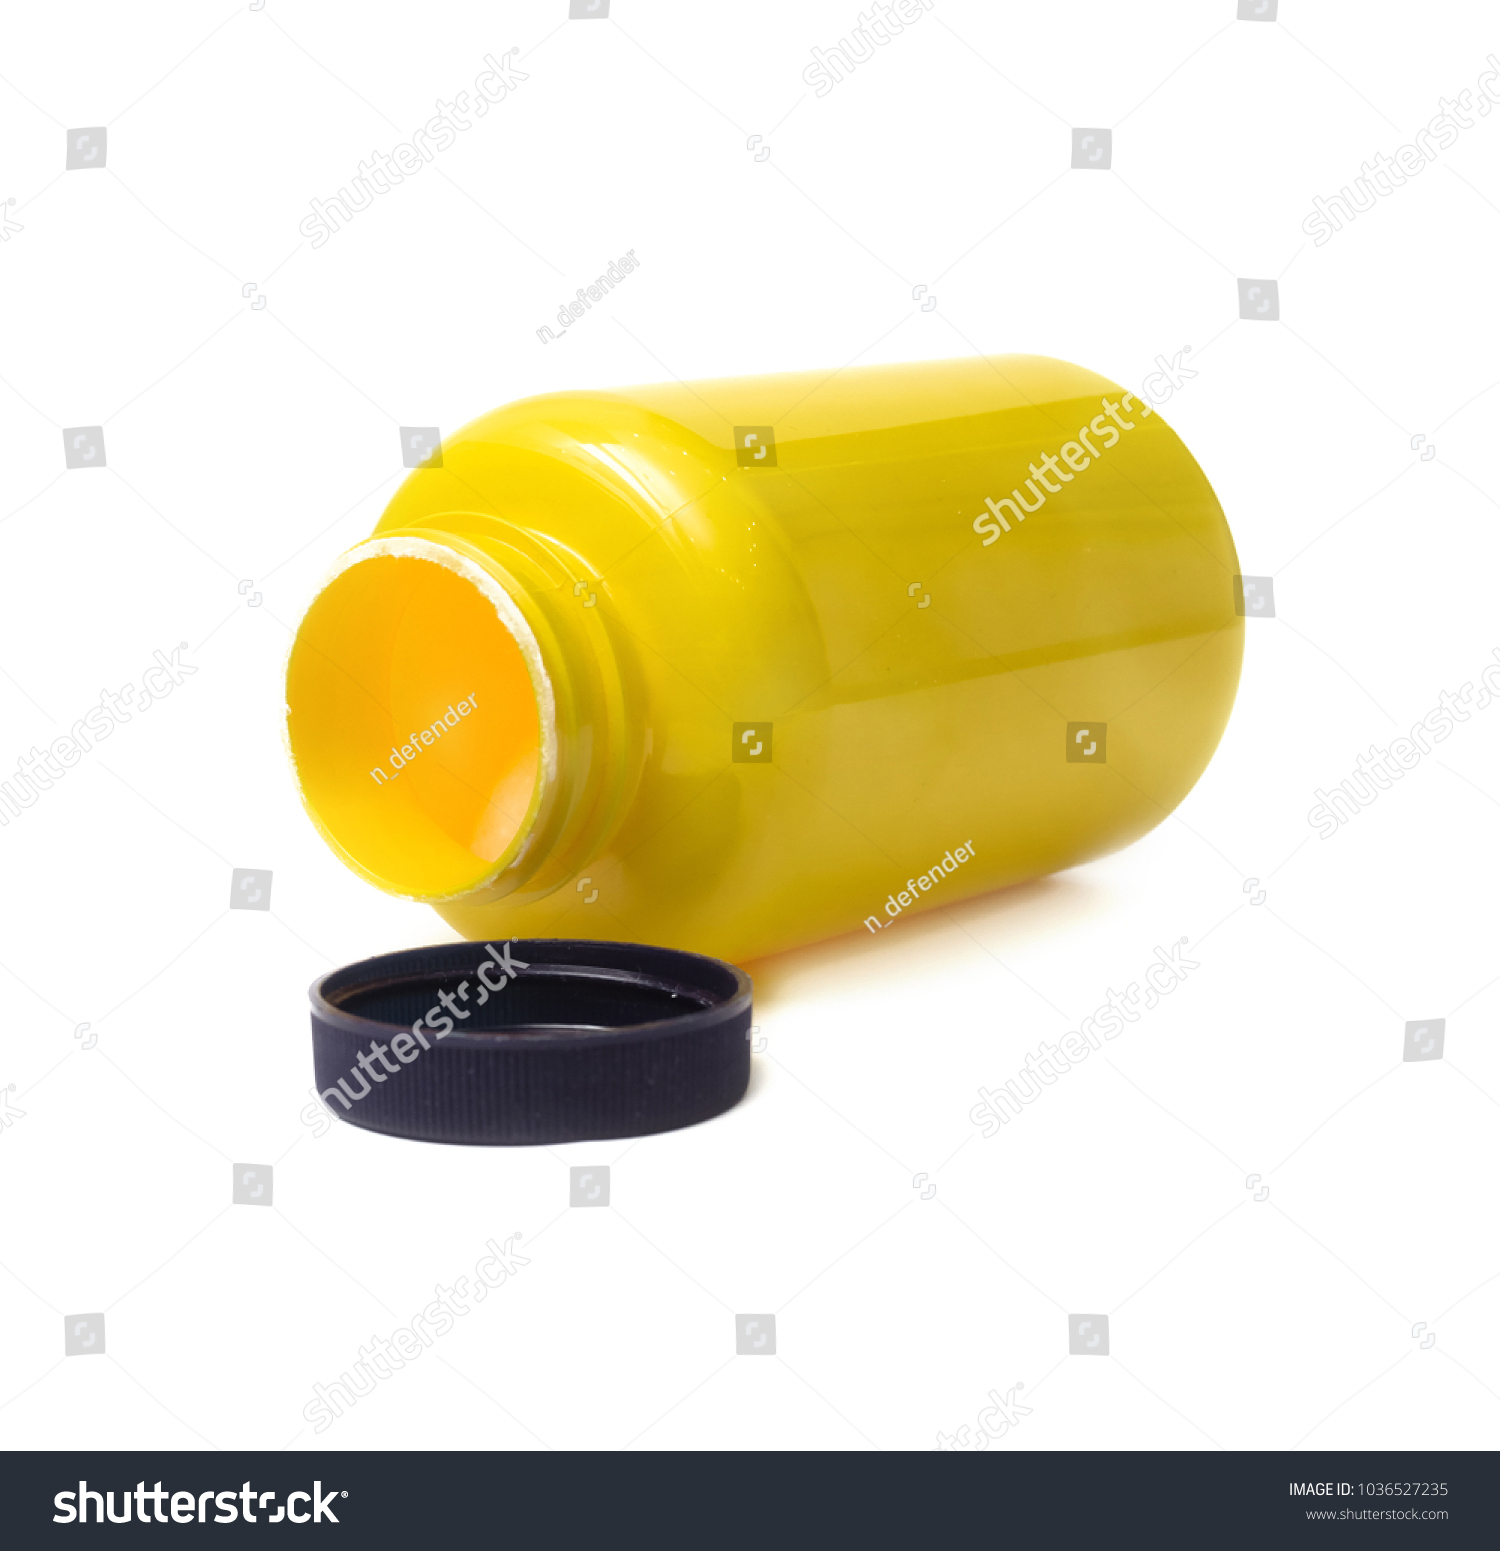 Download Blank Yellow Bottle Sports Nutrition Isolated Objects Stock Image 1036527235 Yellowimages Mockups